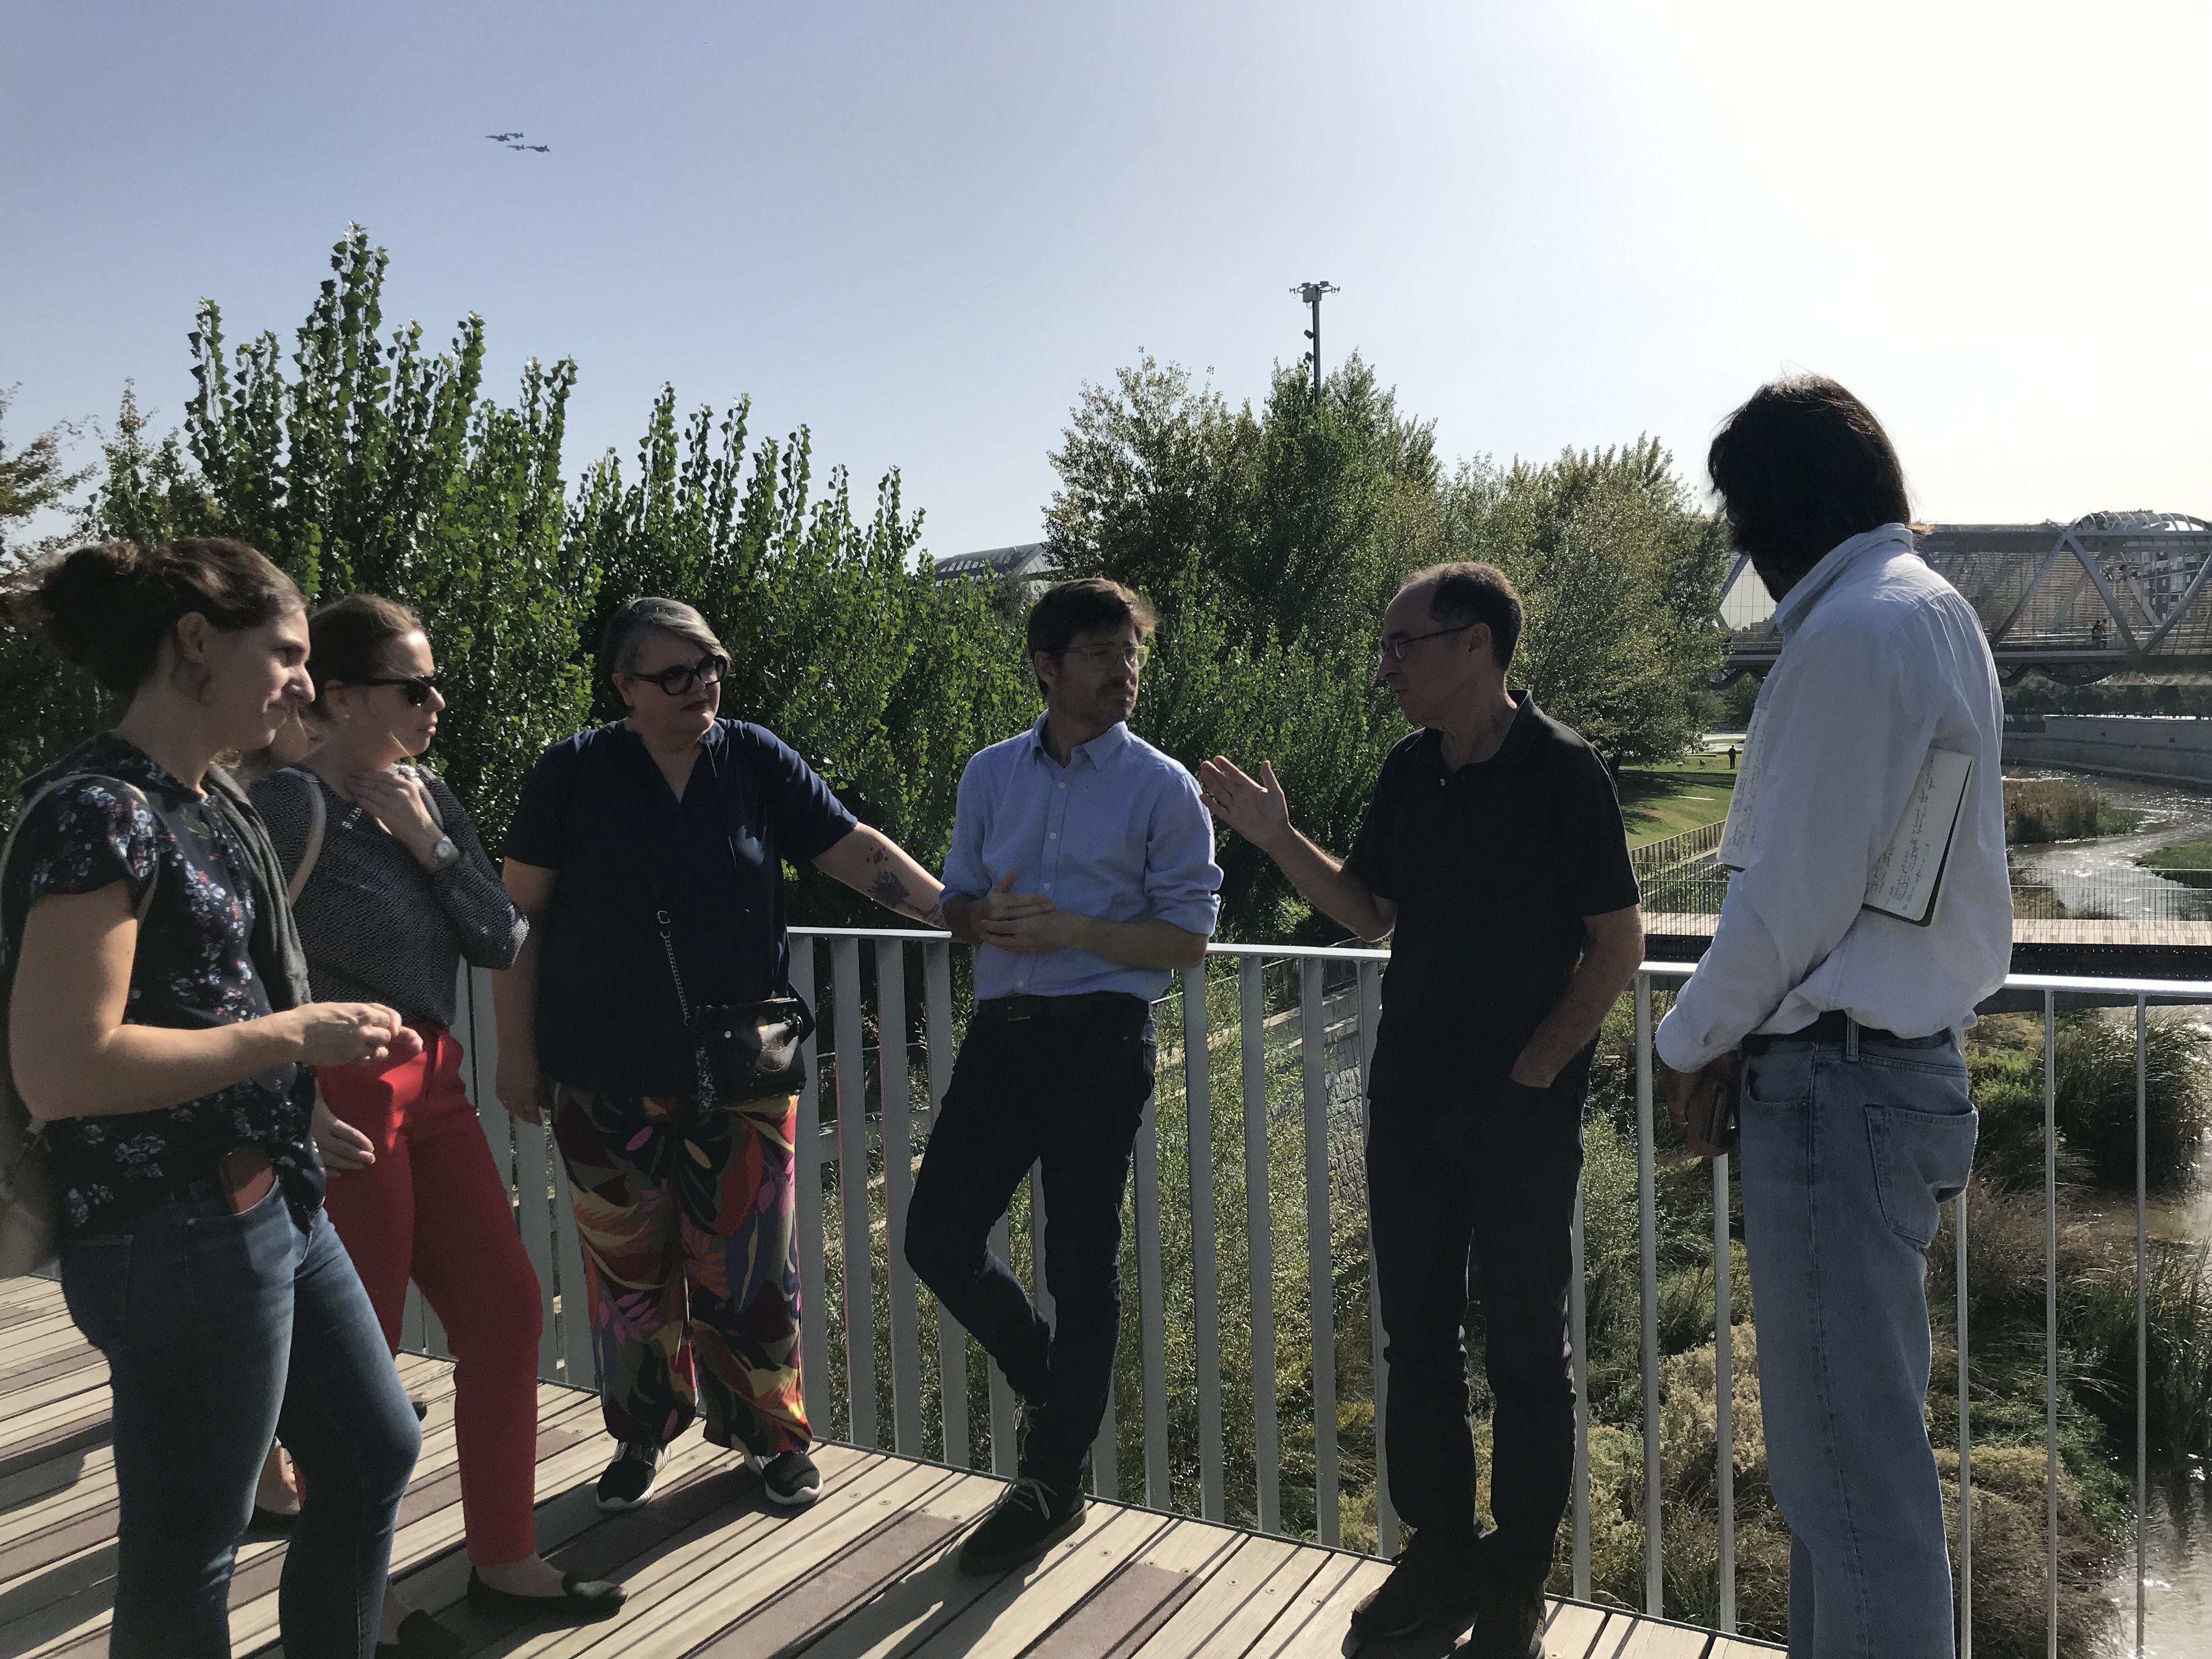 Rafael López, head of the Climate Change Unit of the Madrid City Council, describes the rehabilitation of the Manzanares River in details